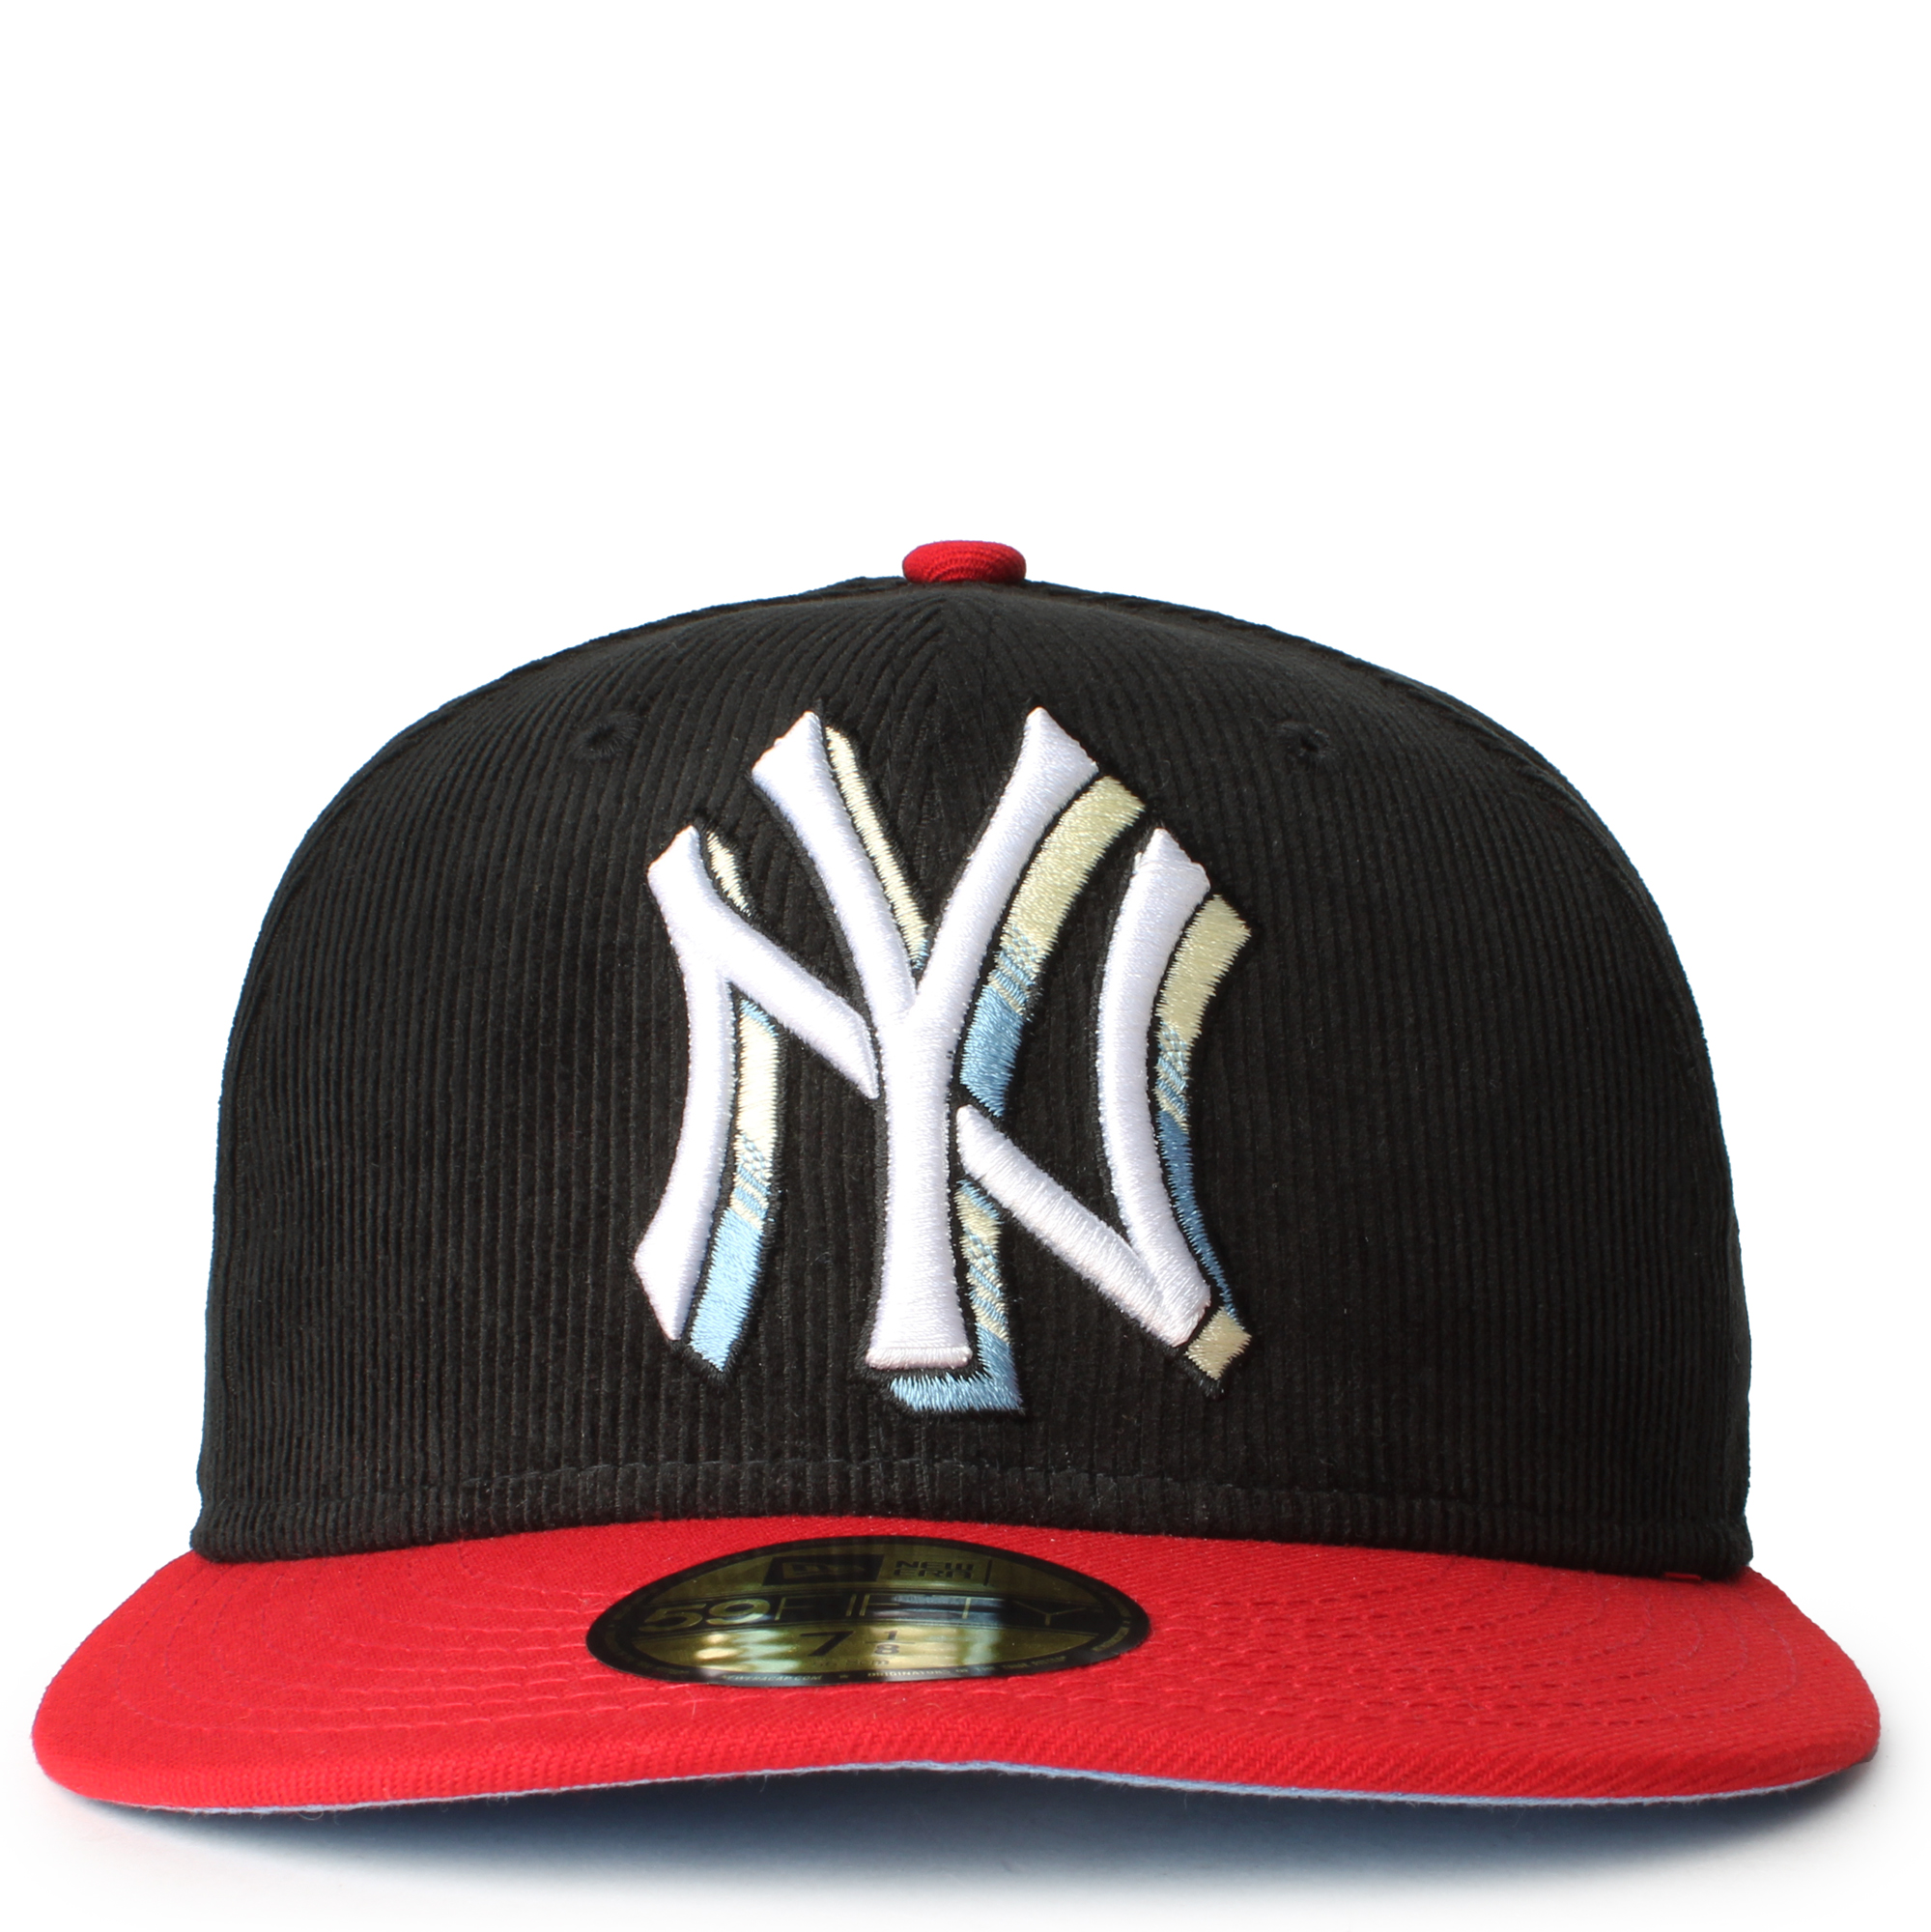 New Era Caps New York Yankees 59FIFTY Corduroy Fitted Hat Black/Red